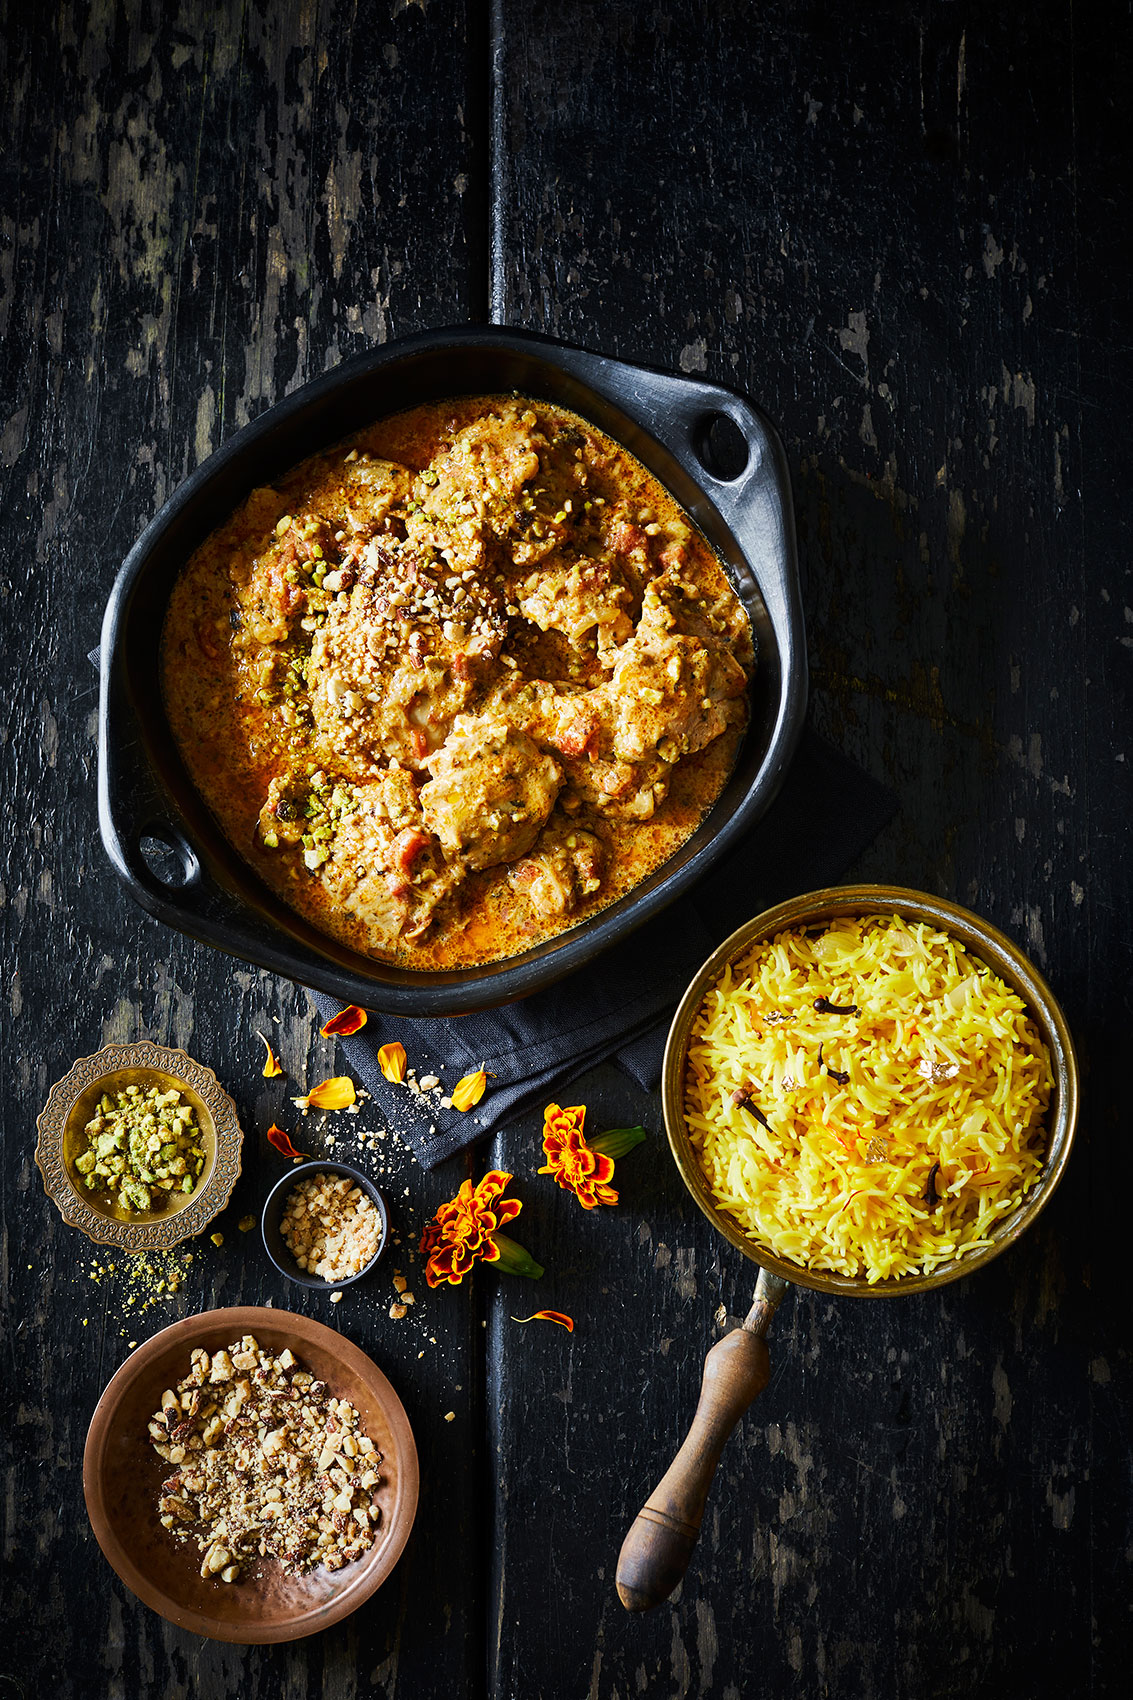 My Indian Kitchen • Nutty Chicken Curry with Flowers & Saffron Rice • Cookbook & Editorial Food Photography